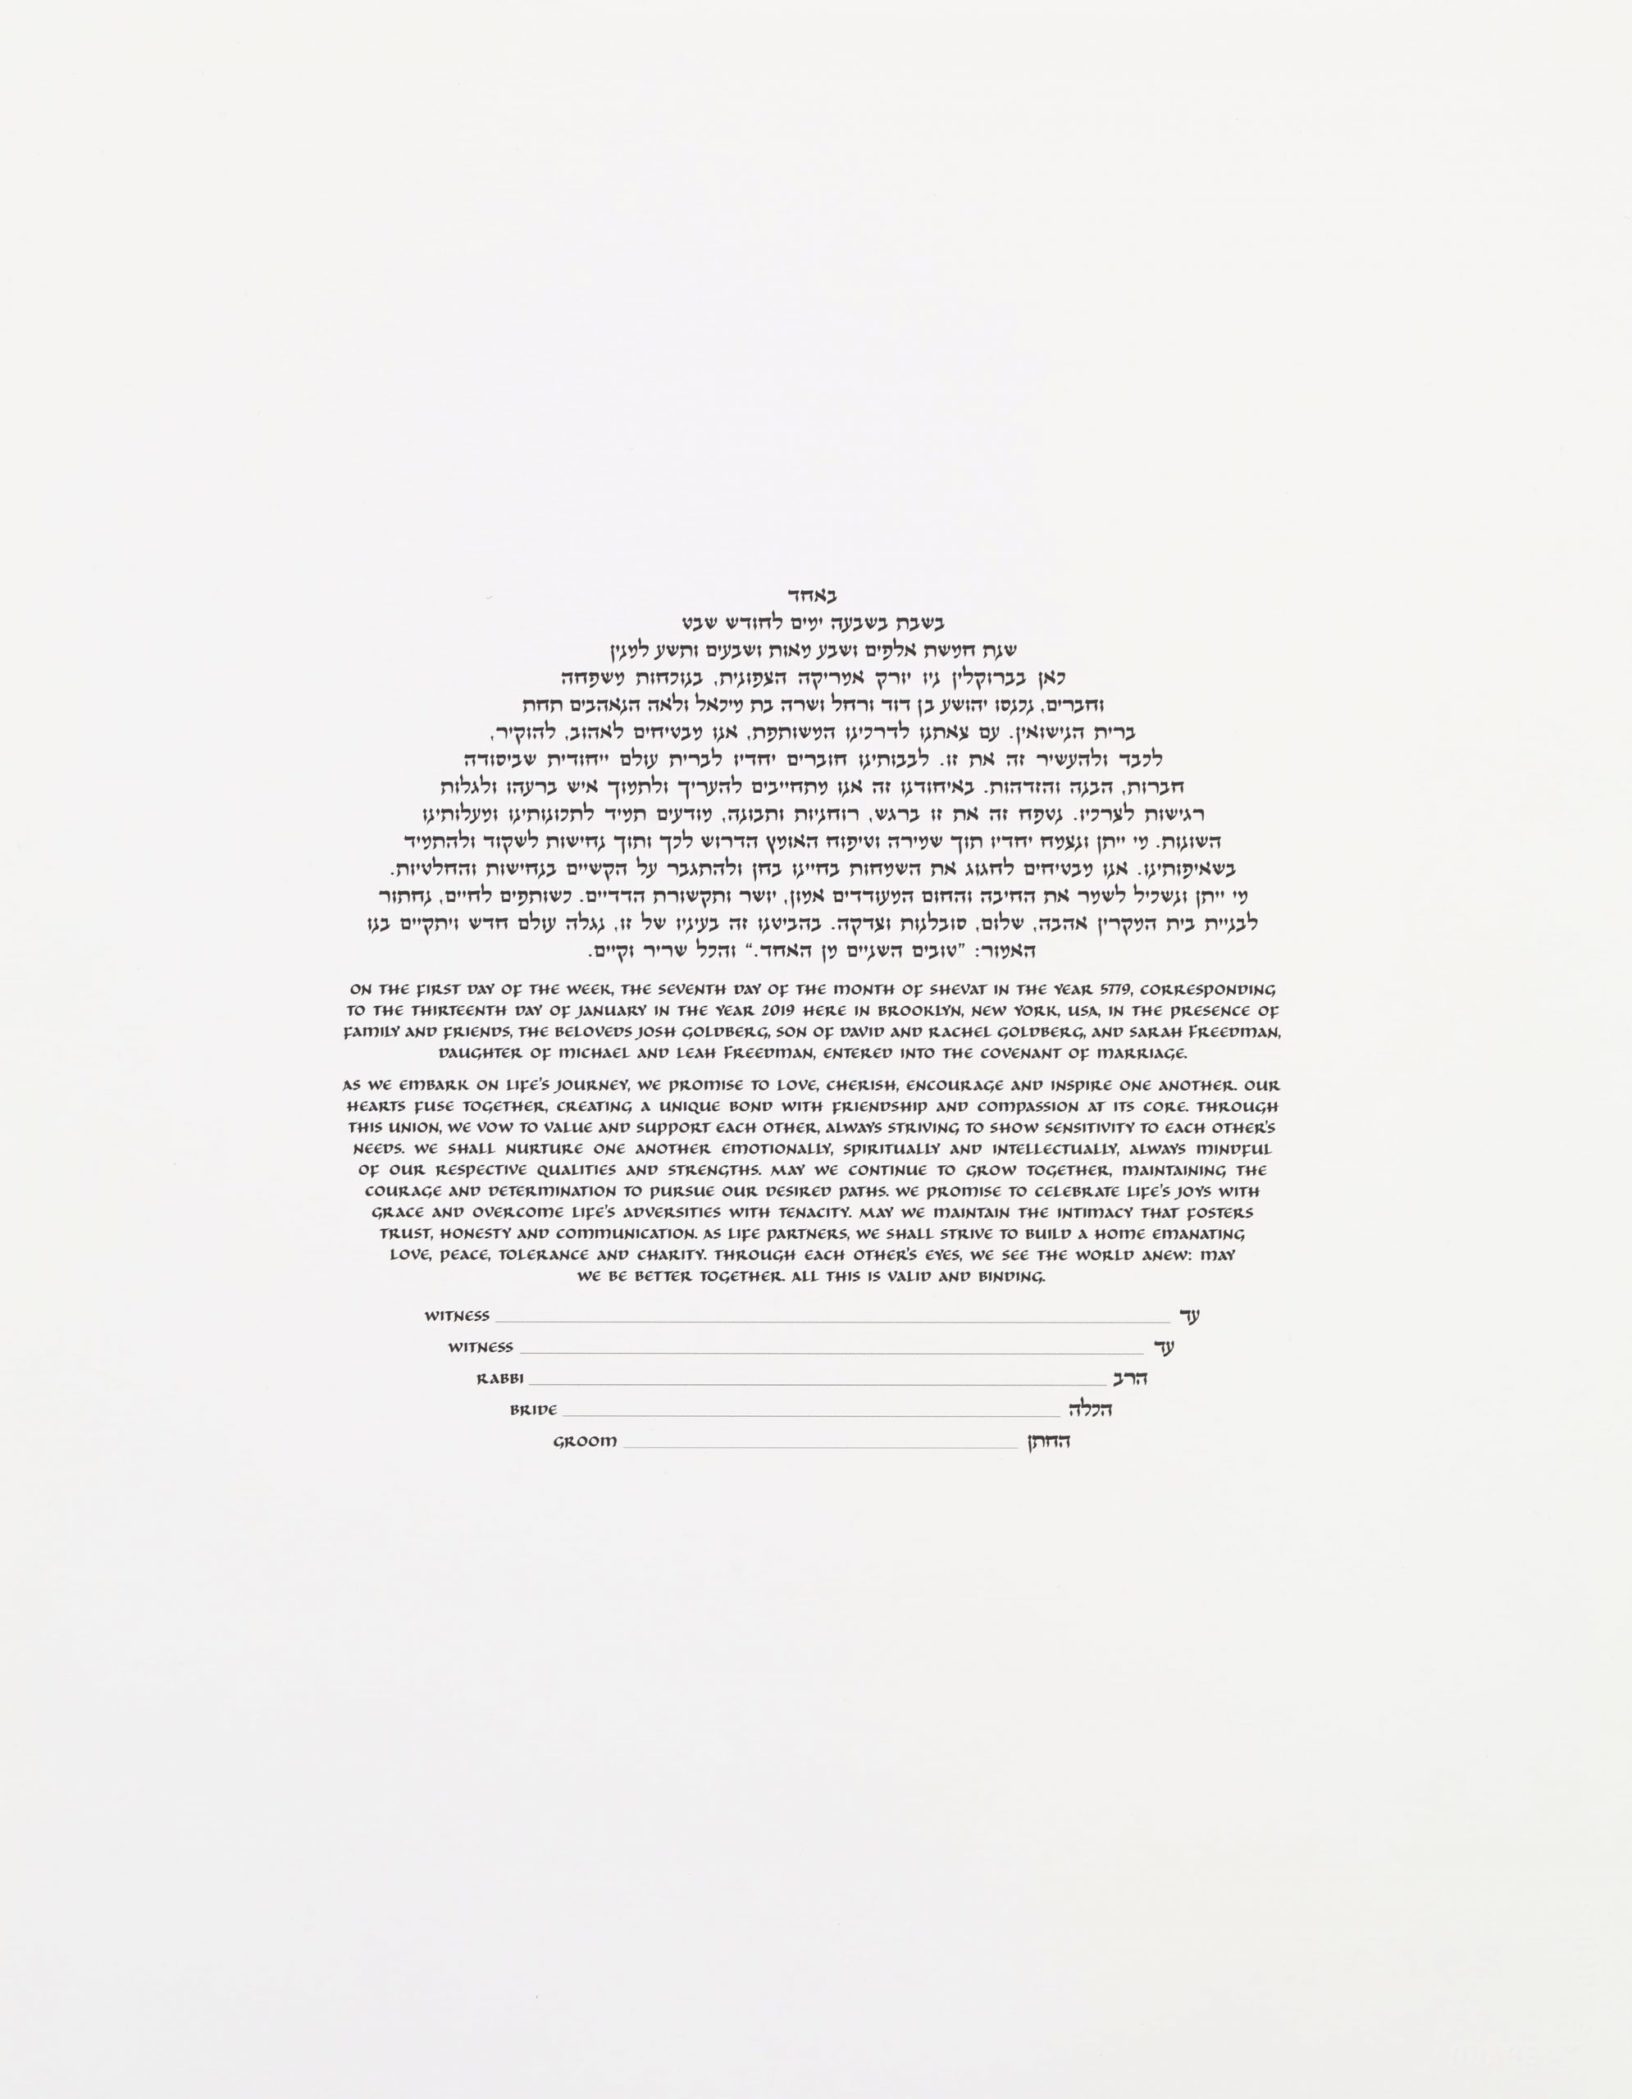 DIY on Arches® Paper - Circular Text on Vertical Background Ketubah Jewish Marriage Contracts by You